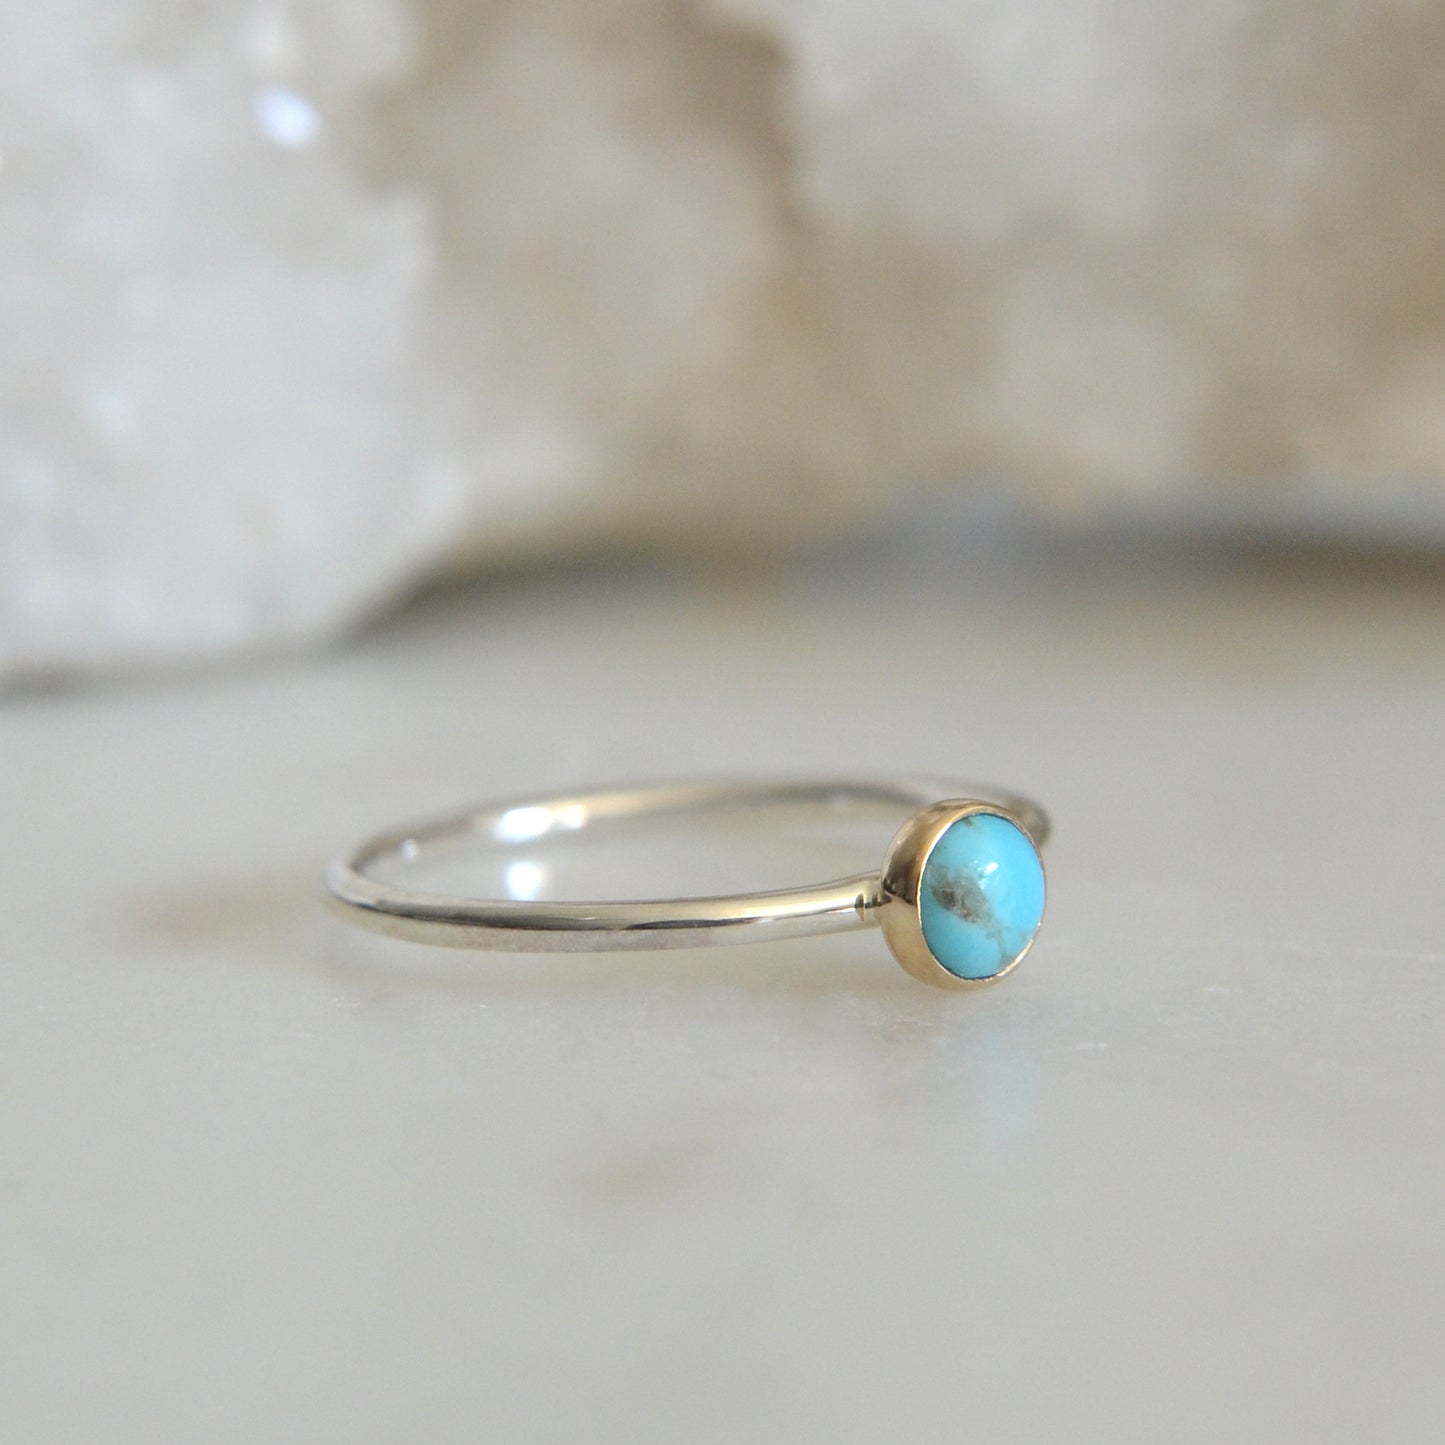 14k & Silver Turquoise Ring